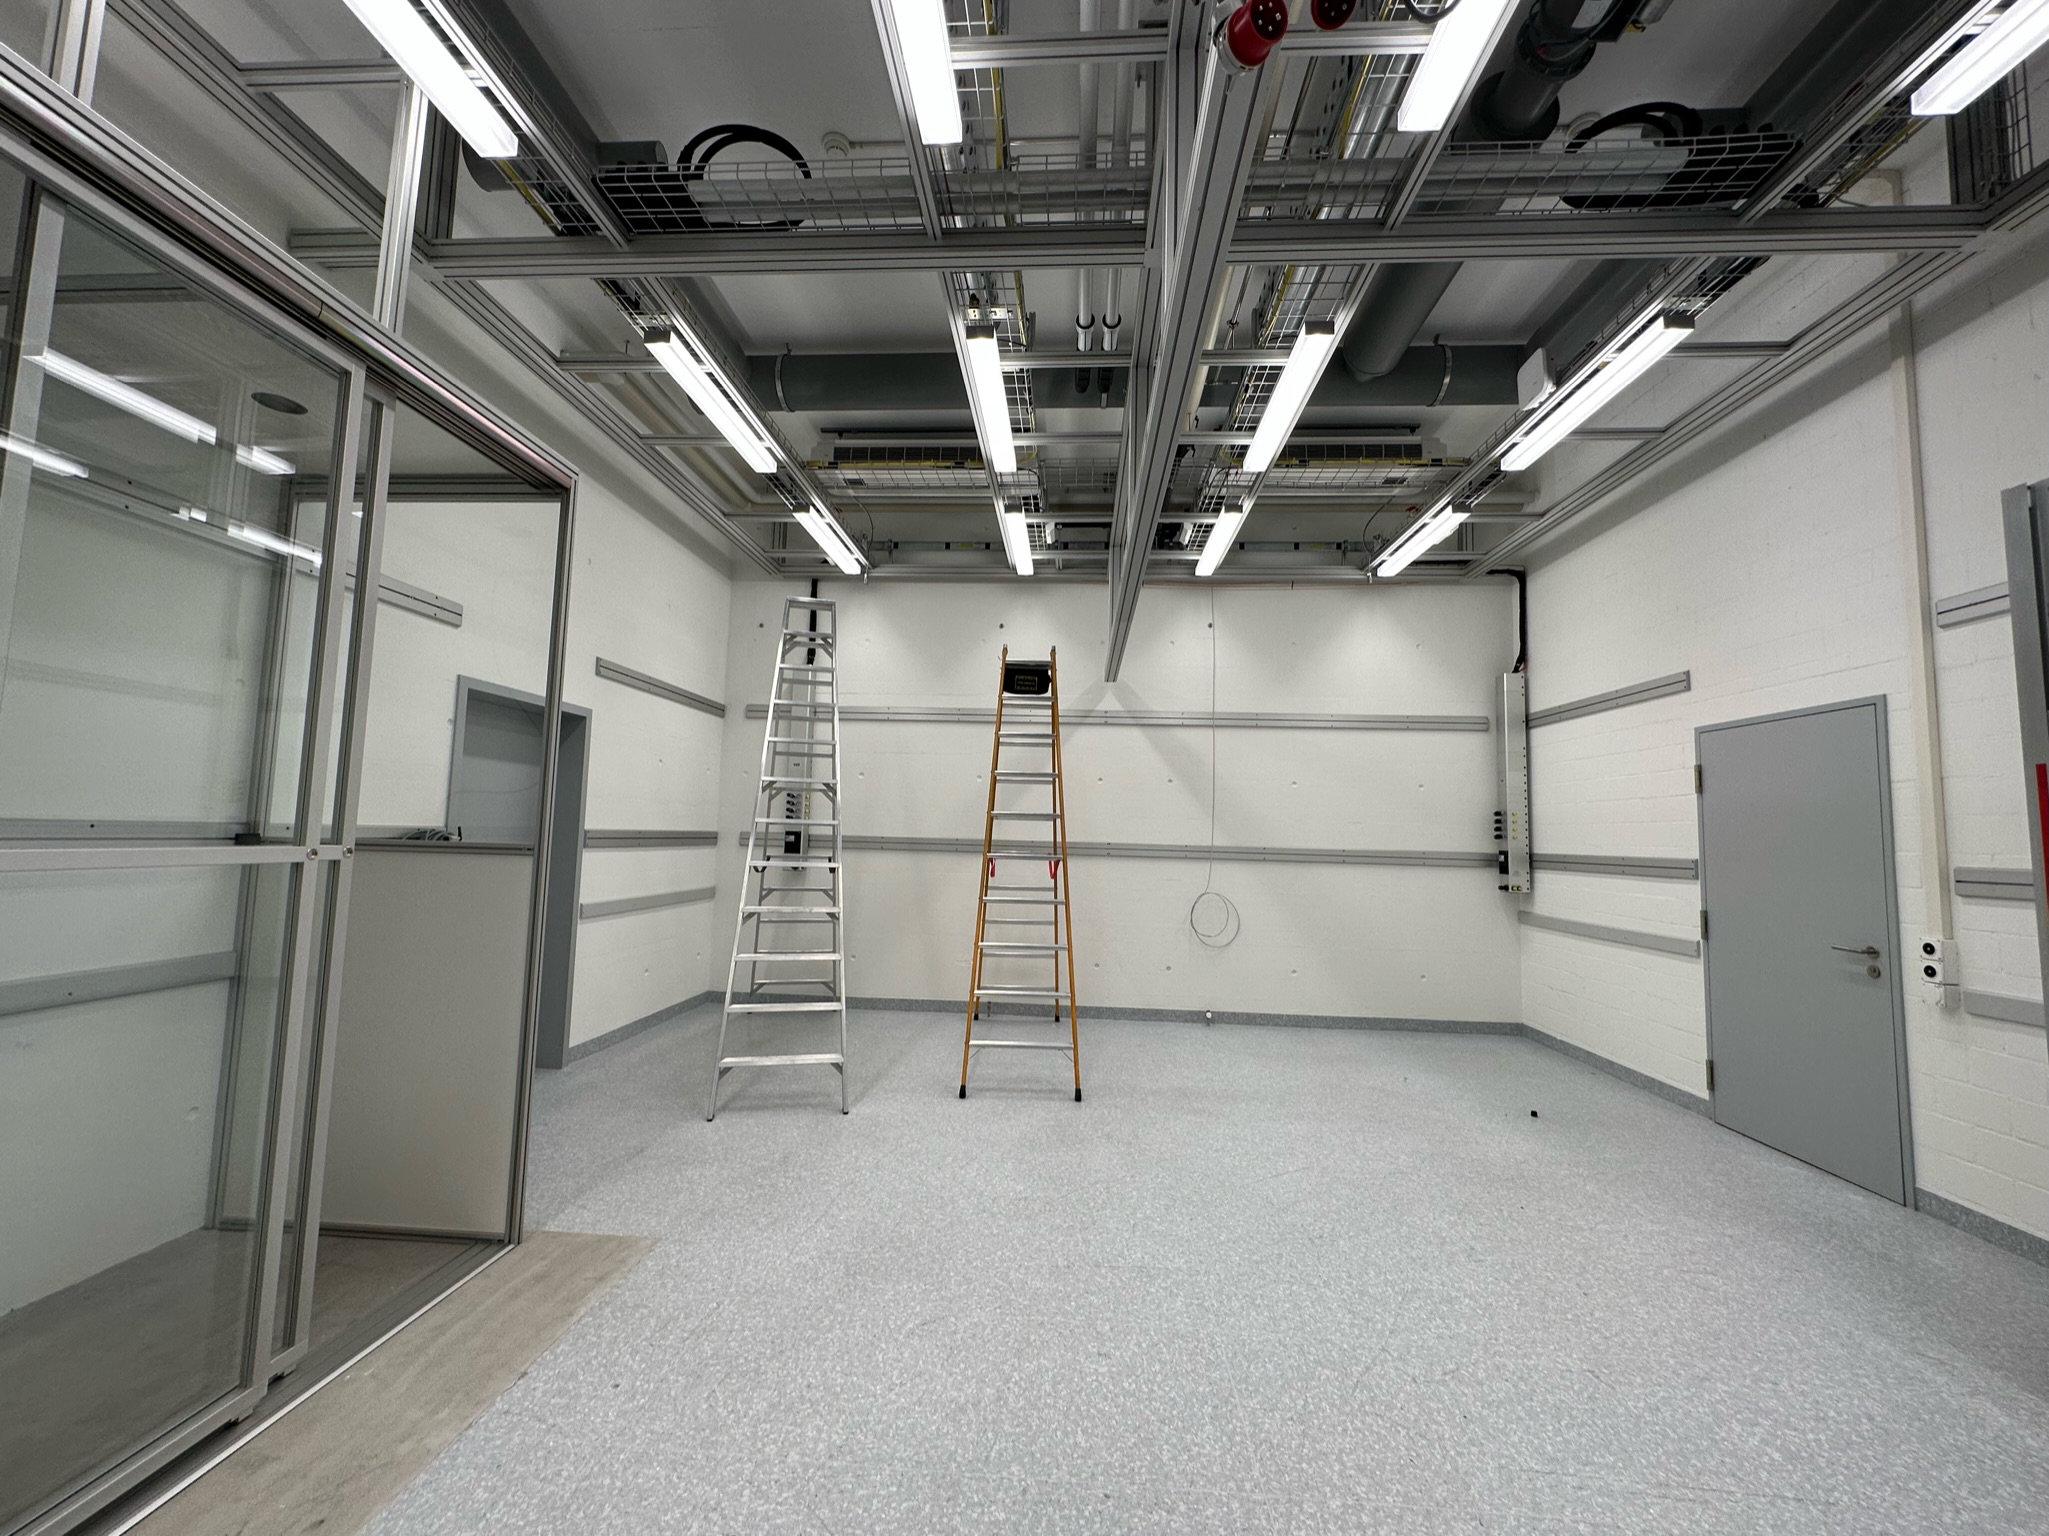 Enlarged view: Completion of the refurbishment of the laboratory space.